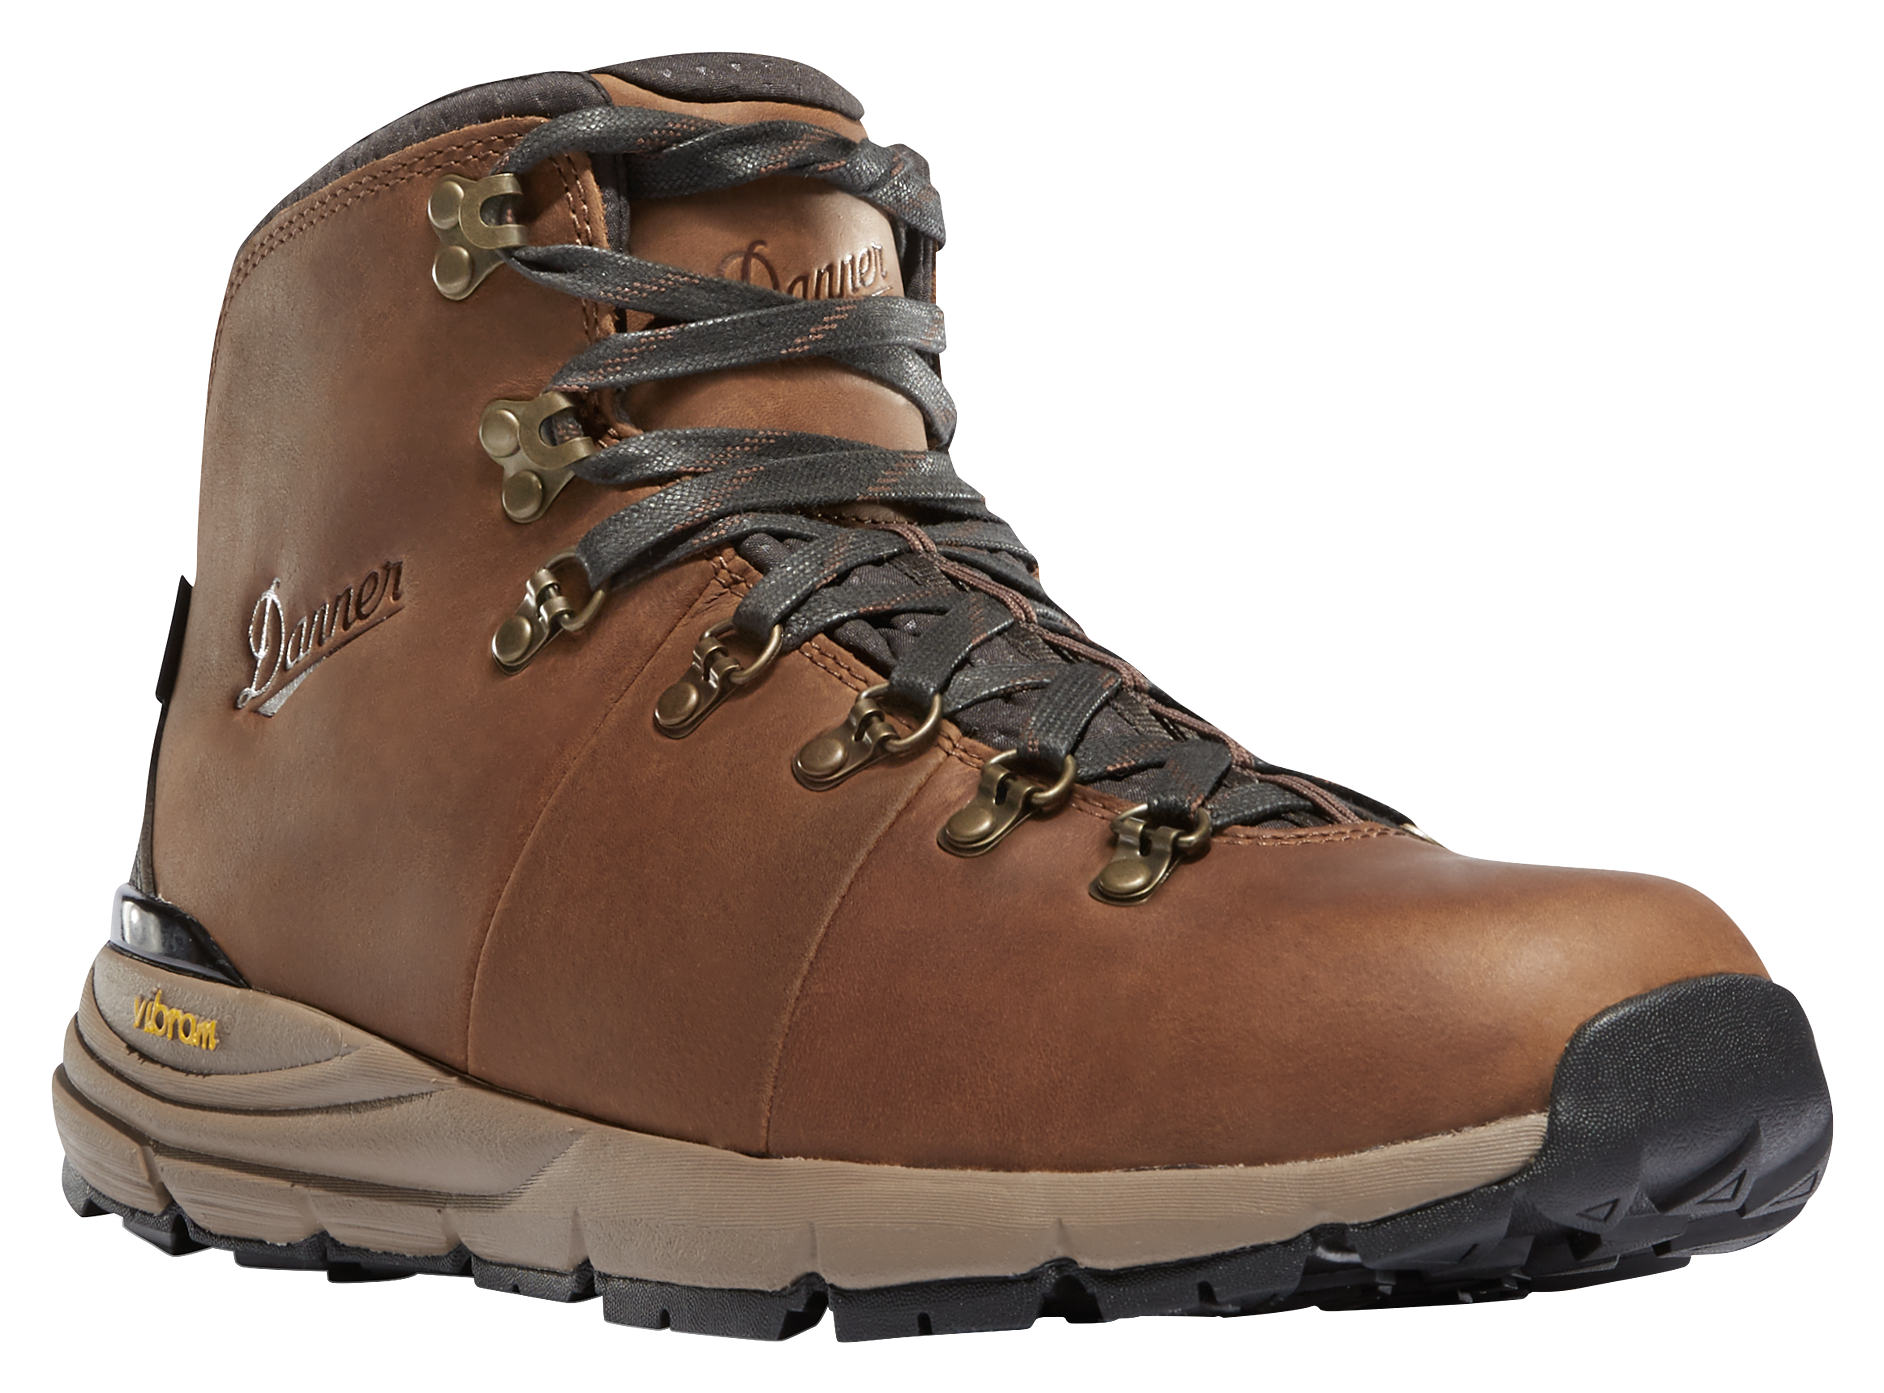 Danner Mountain 600 Waterproof Hiking Boots for Men - Rich Brown - 11.5M